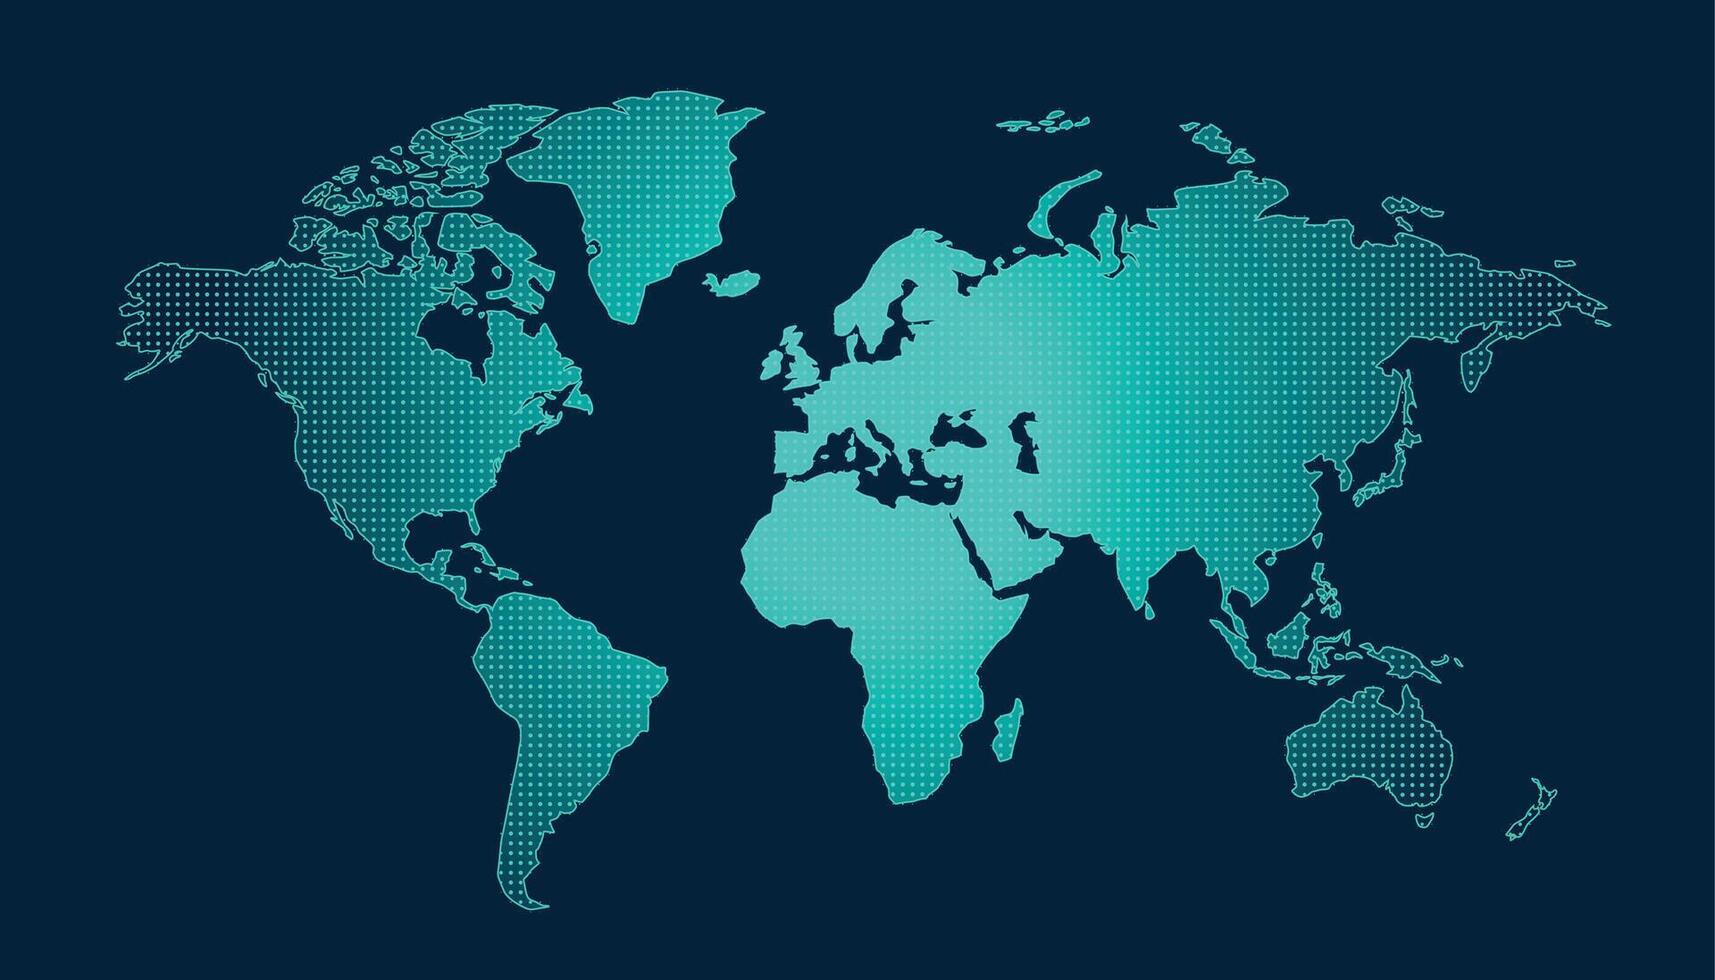 bright aquamarine world map in dotted style template design vector